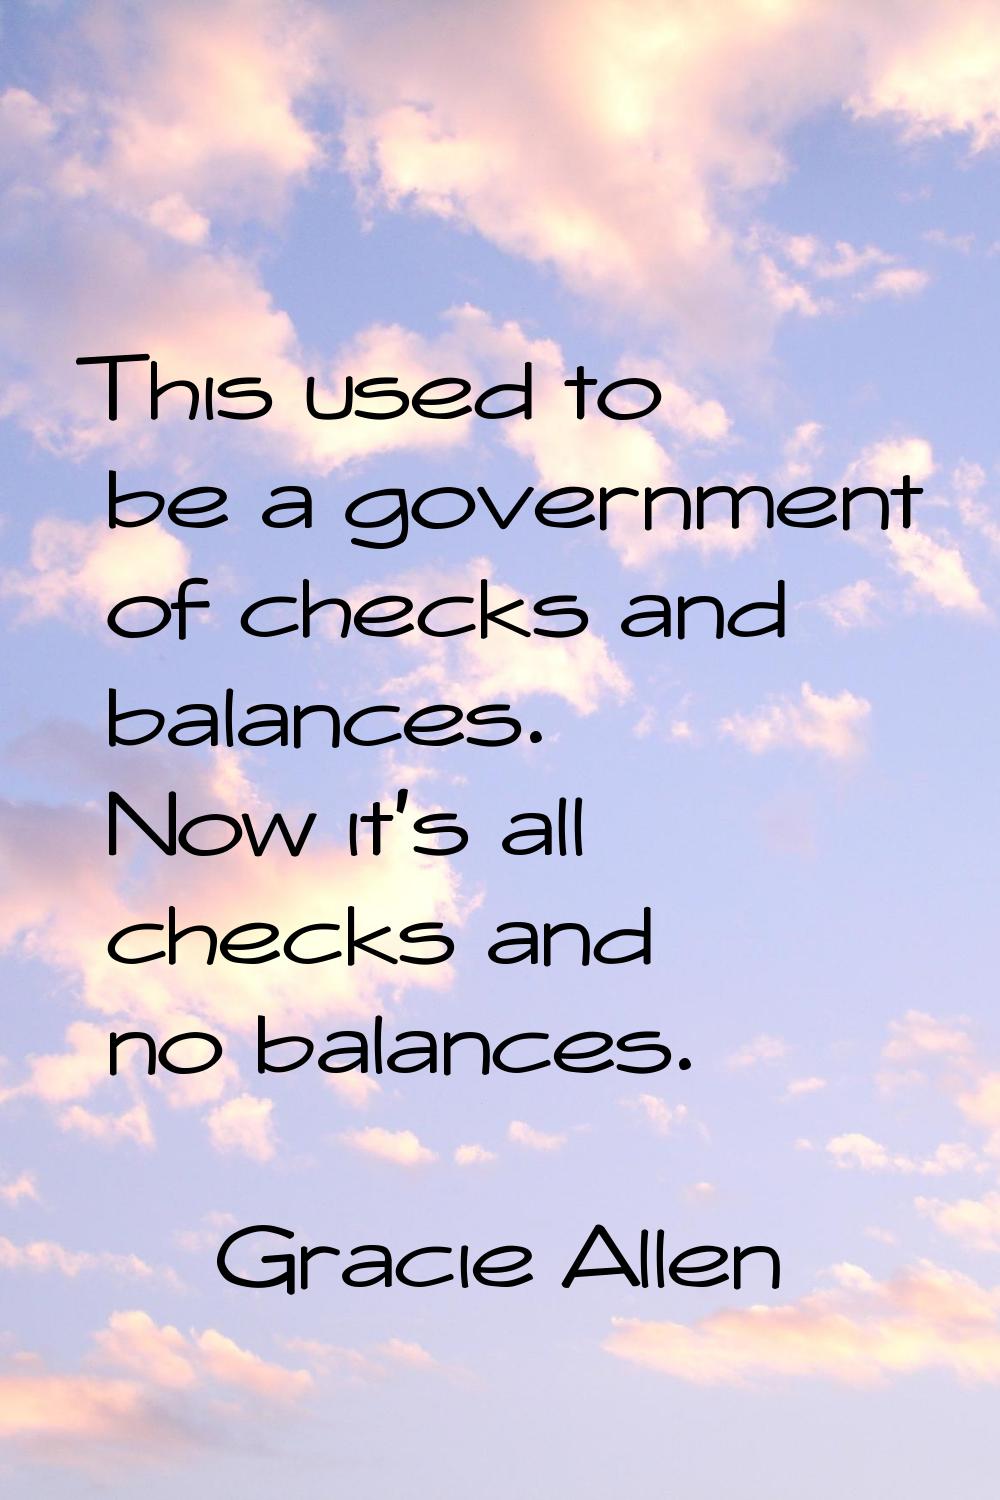 This used to be a government of checks and balances. Now it's all checks and no balances.